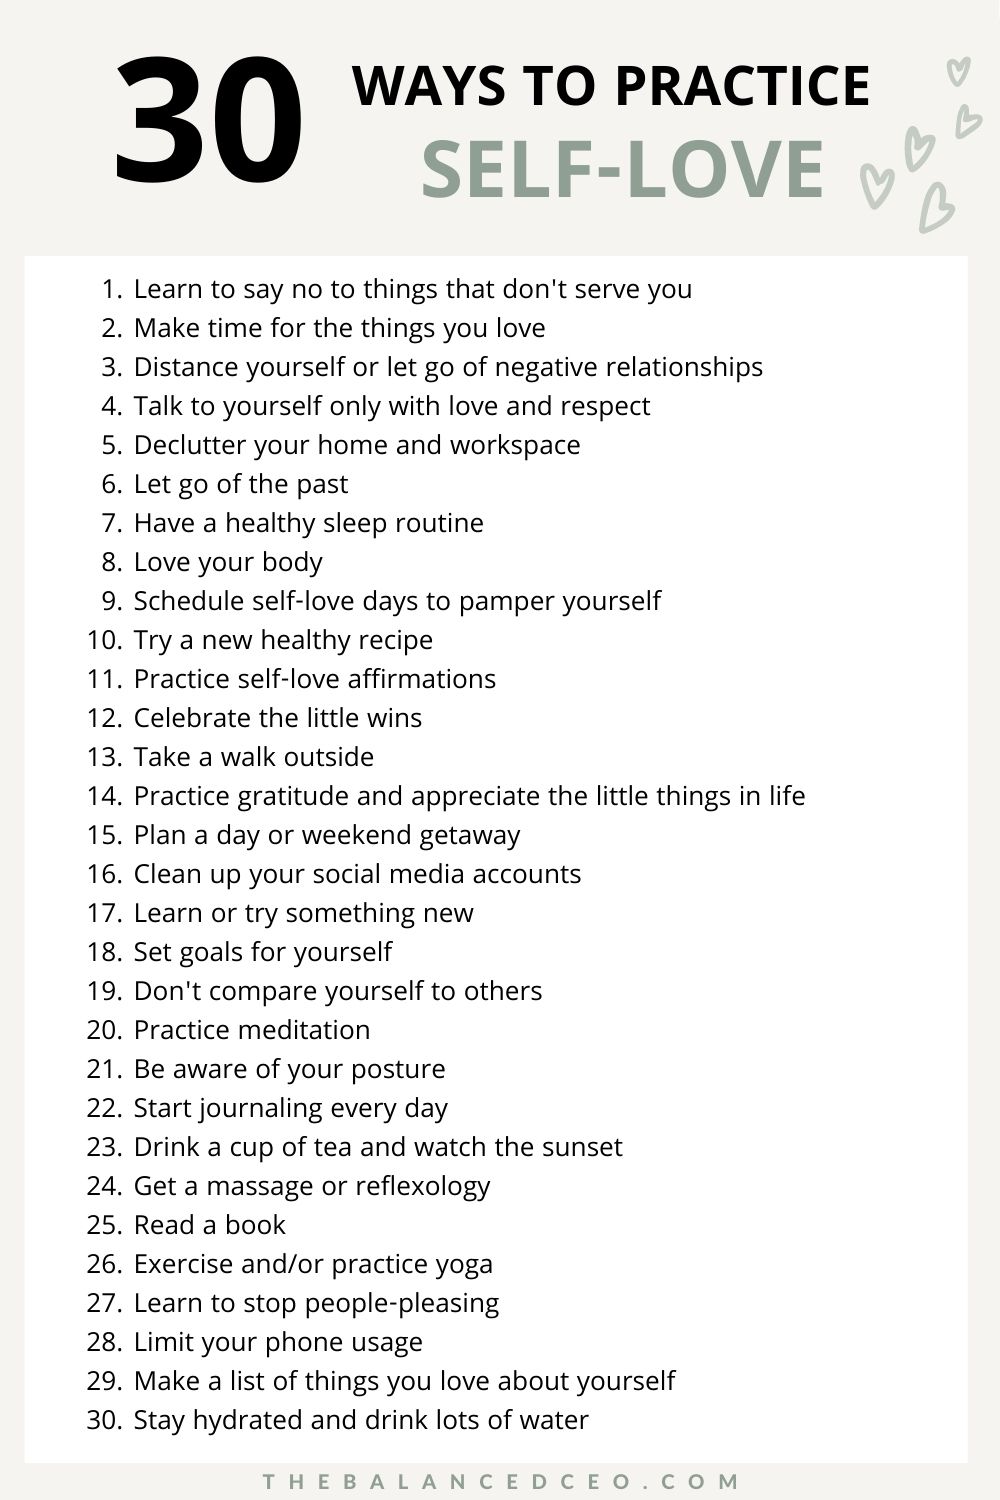 30 Simple Ways to Make Life Easier for Yourself